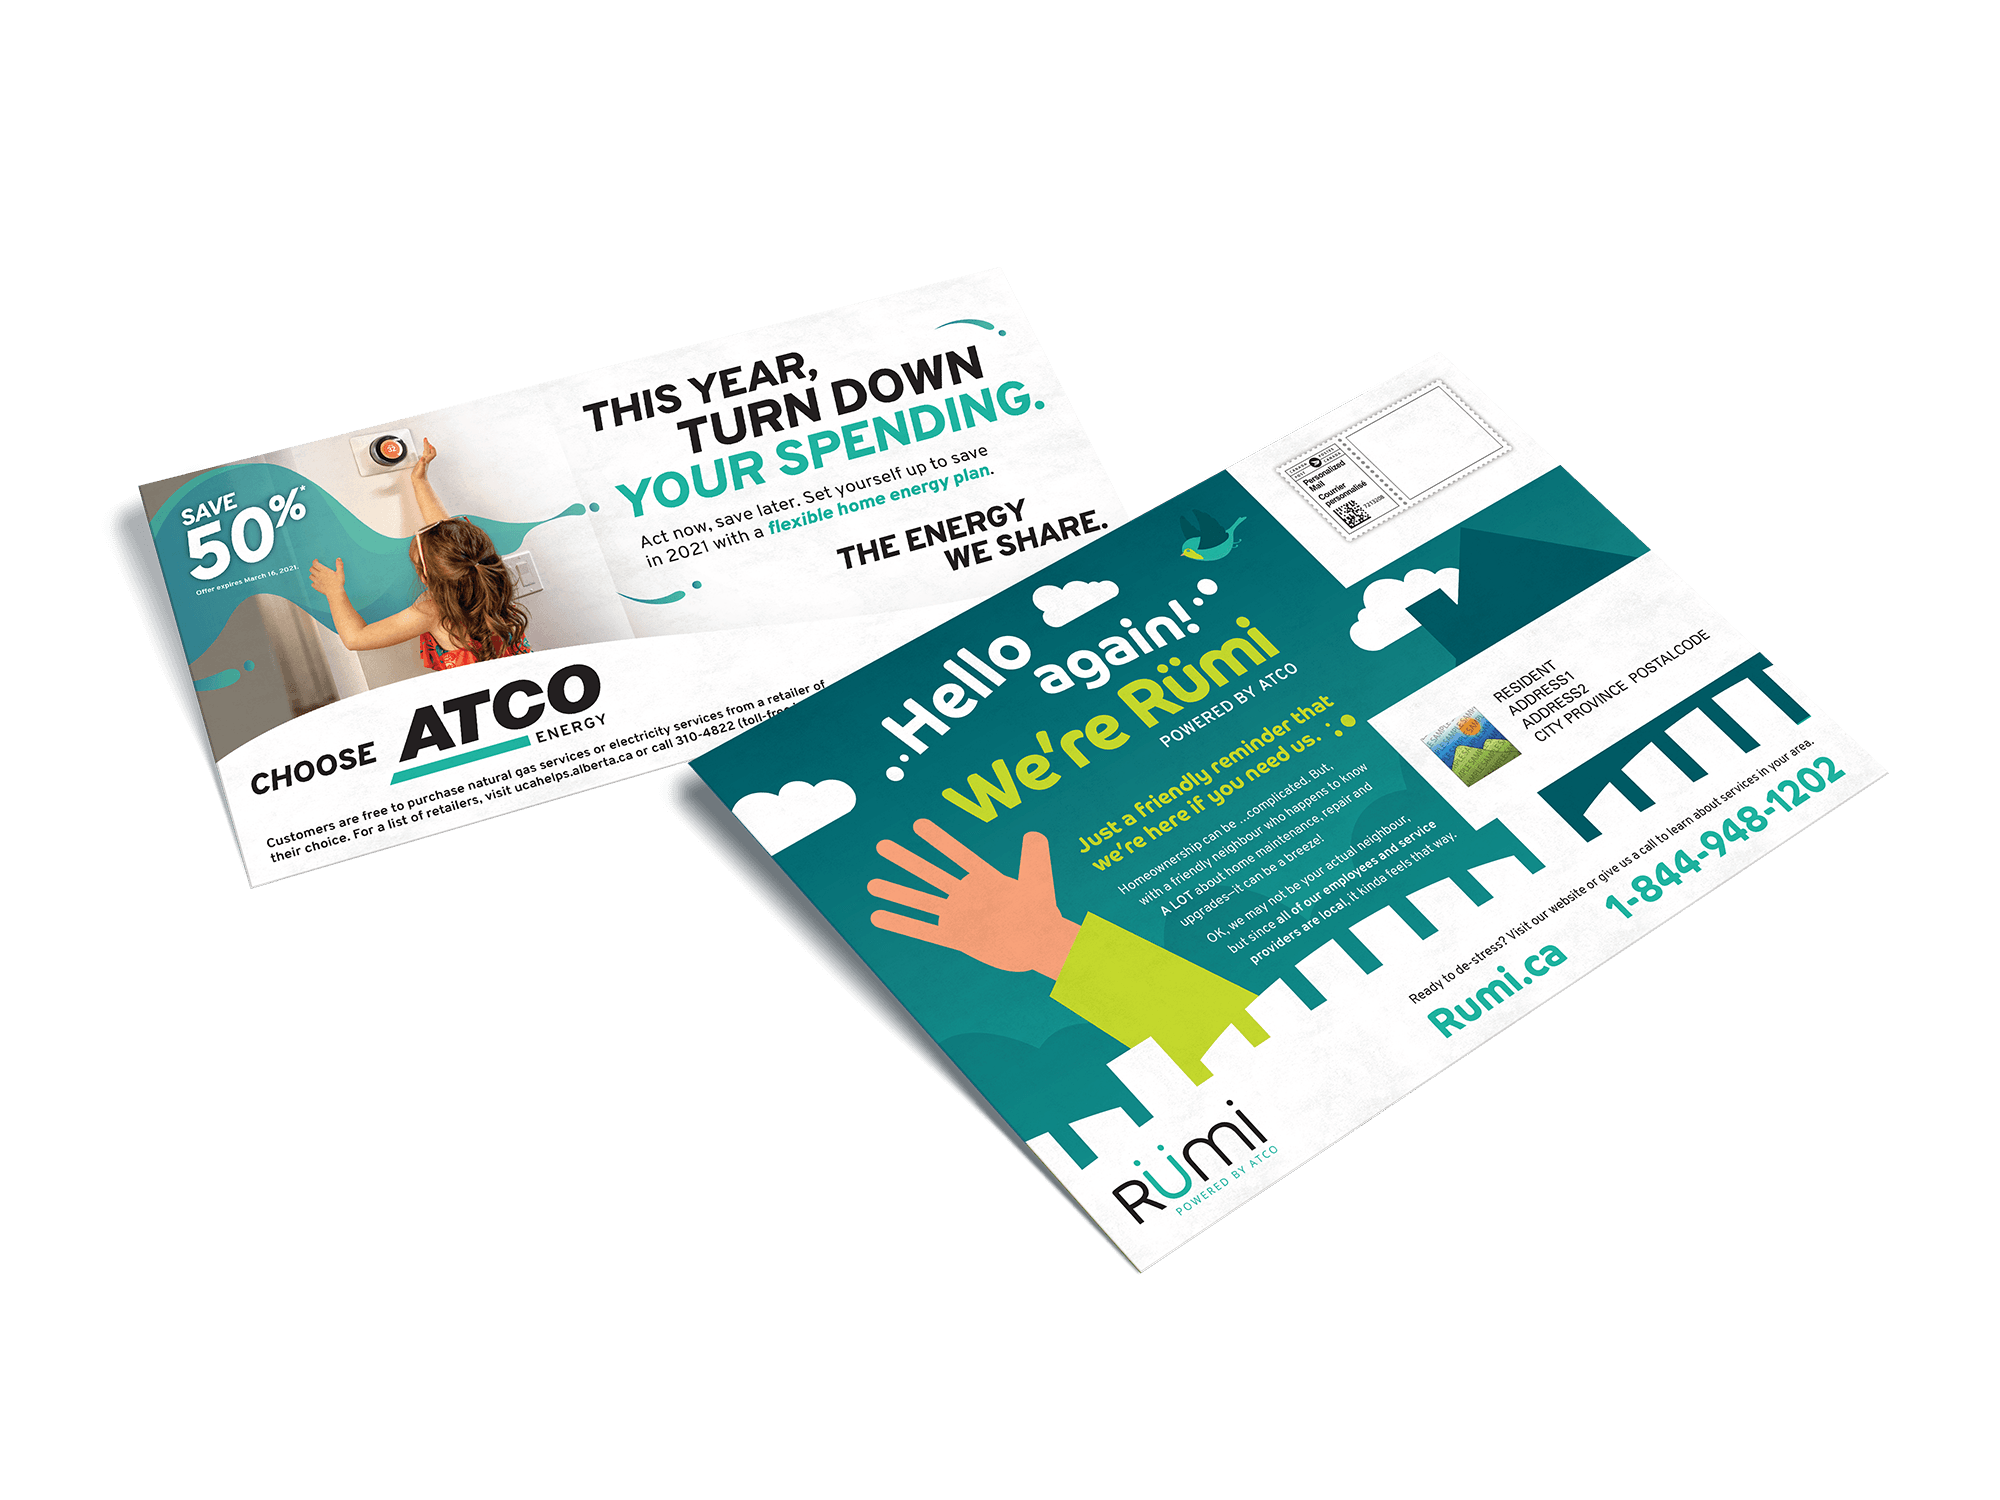 Two direct marketing flyers for Rumi and ATCOenergy